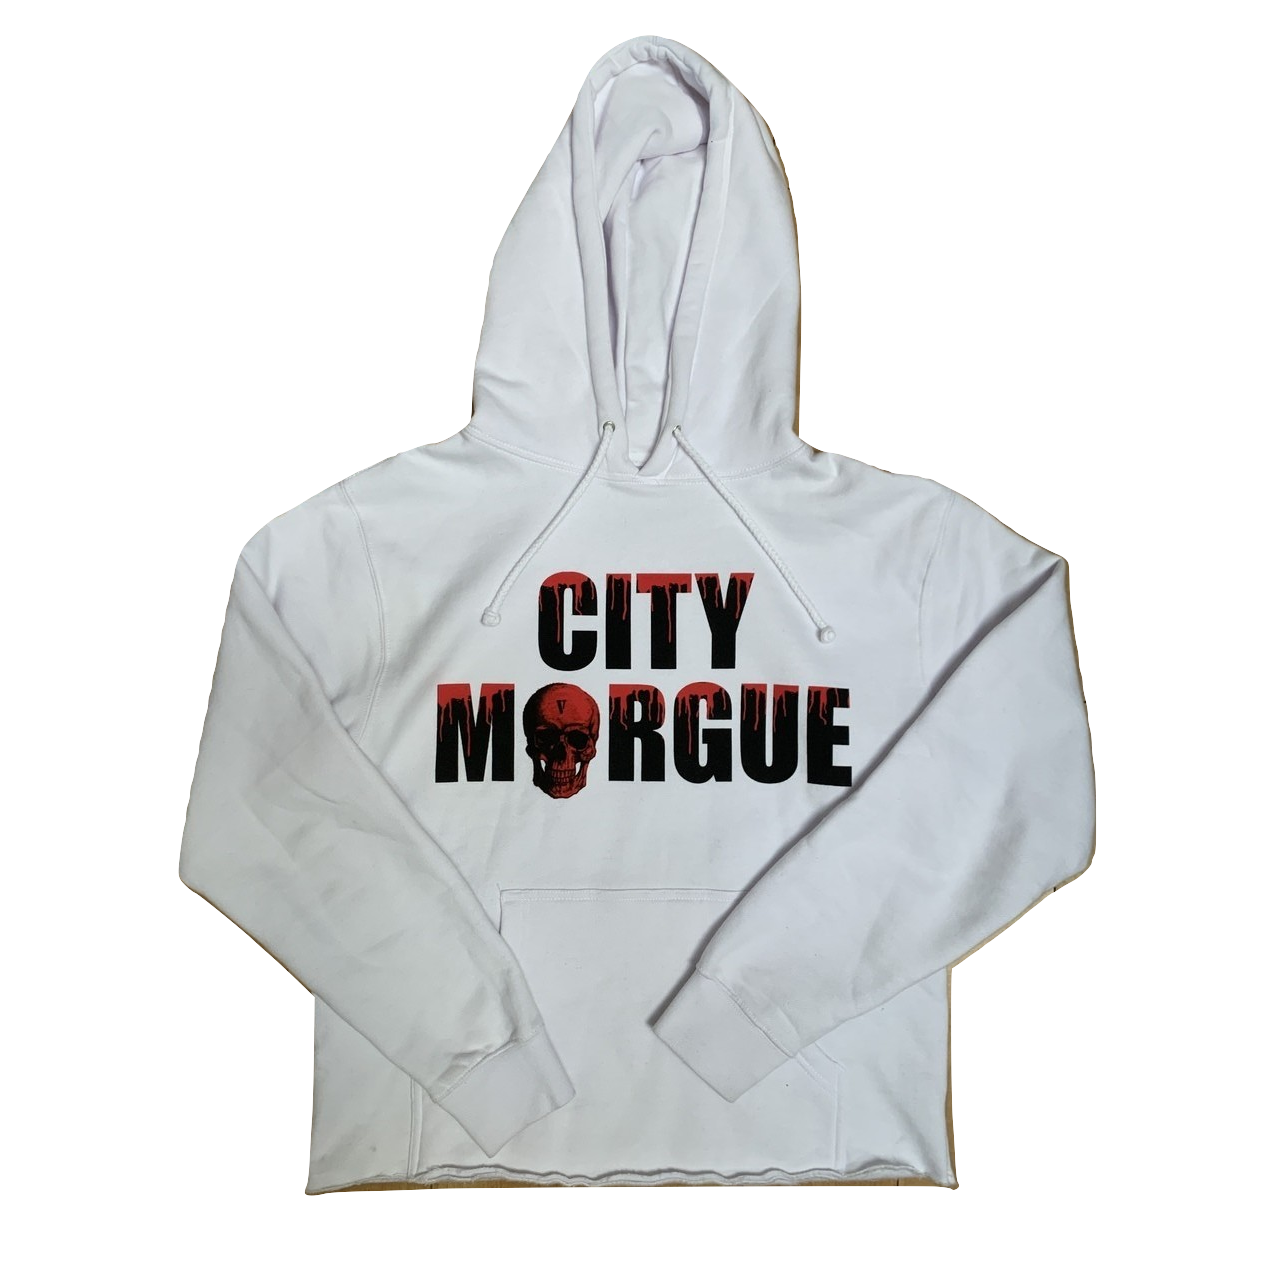 City Morgue x VLone Dogs Cropped Hoodie - White